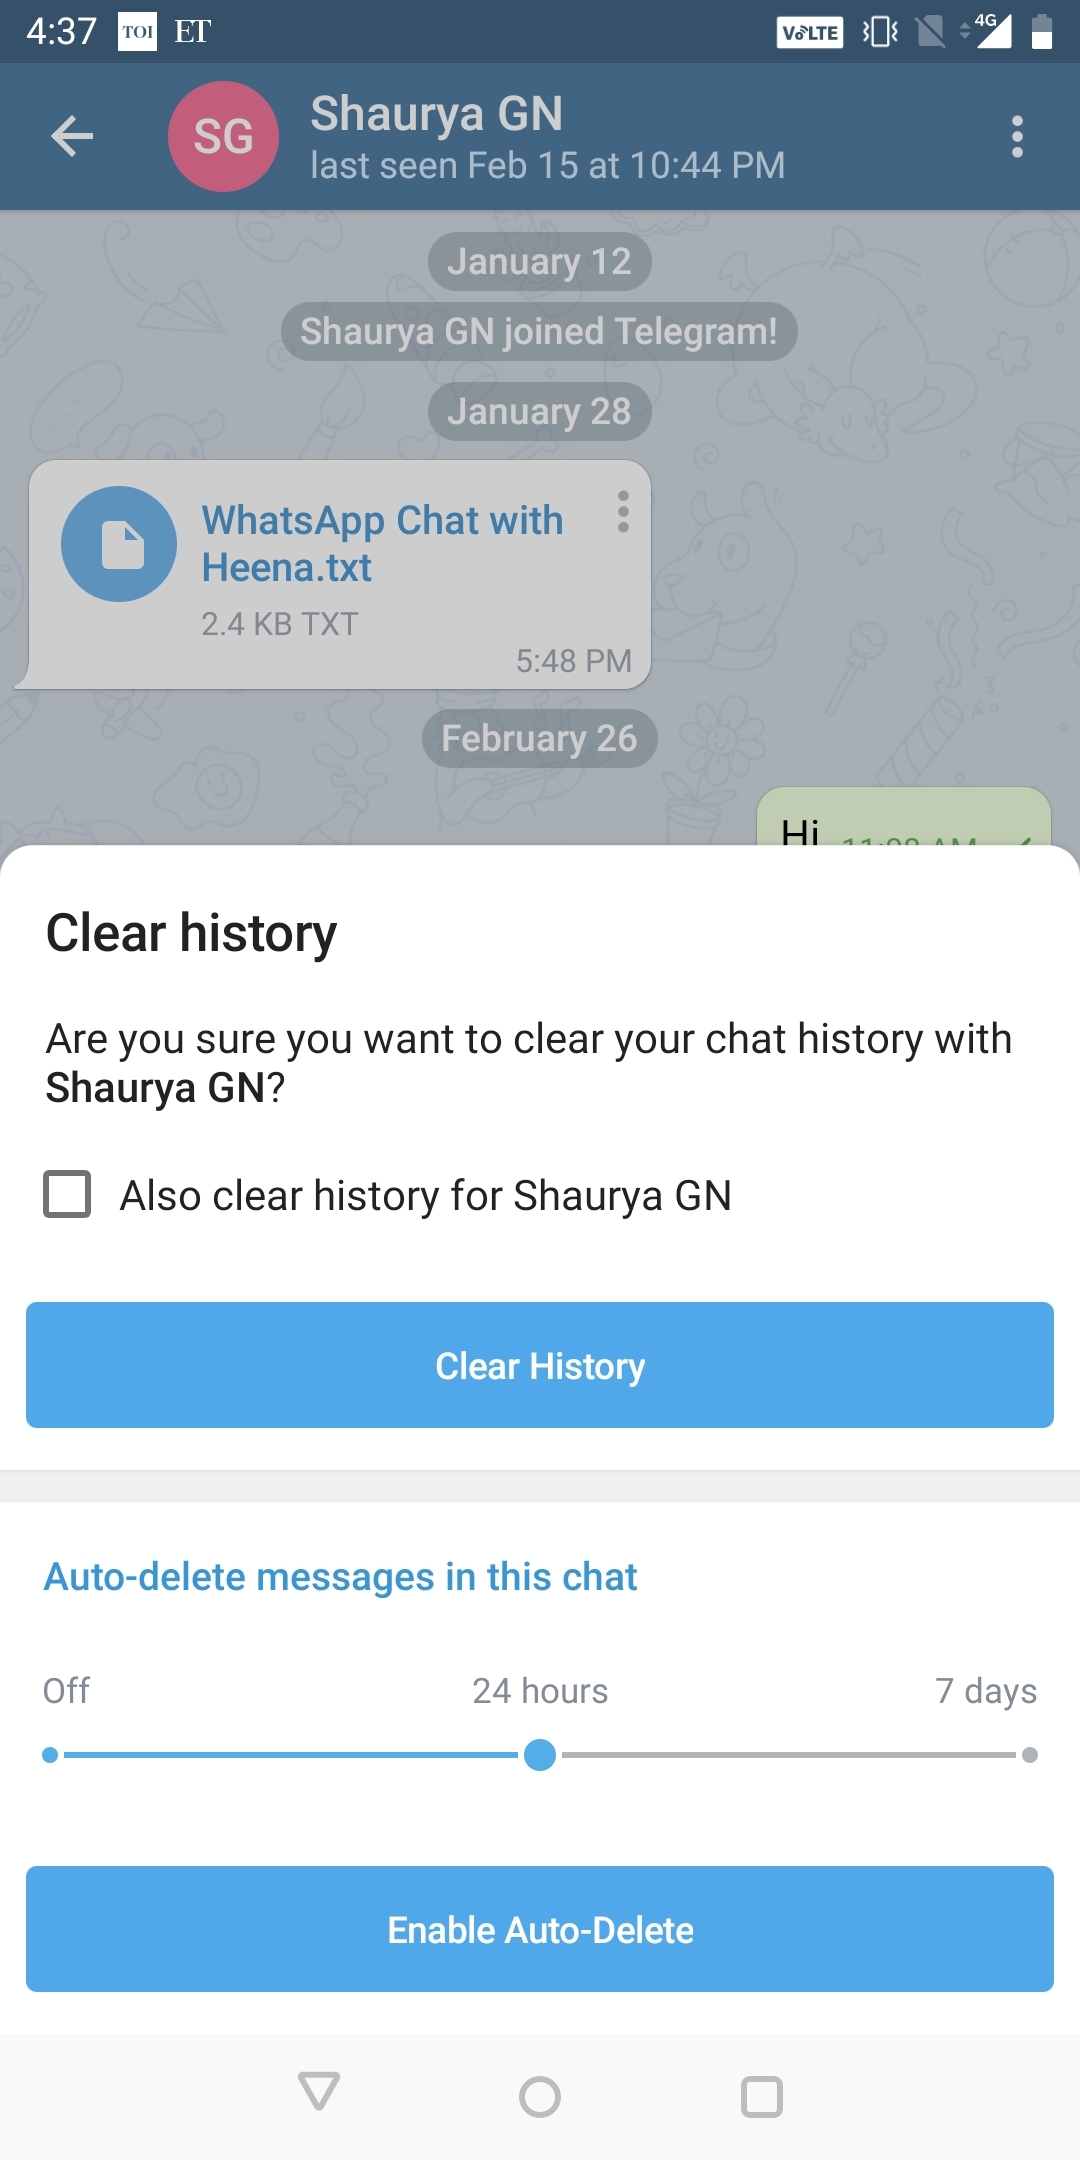 How to enable auto-delete feature on Telegram 5